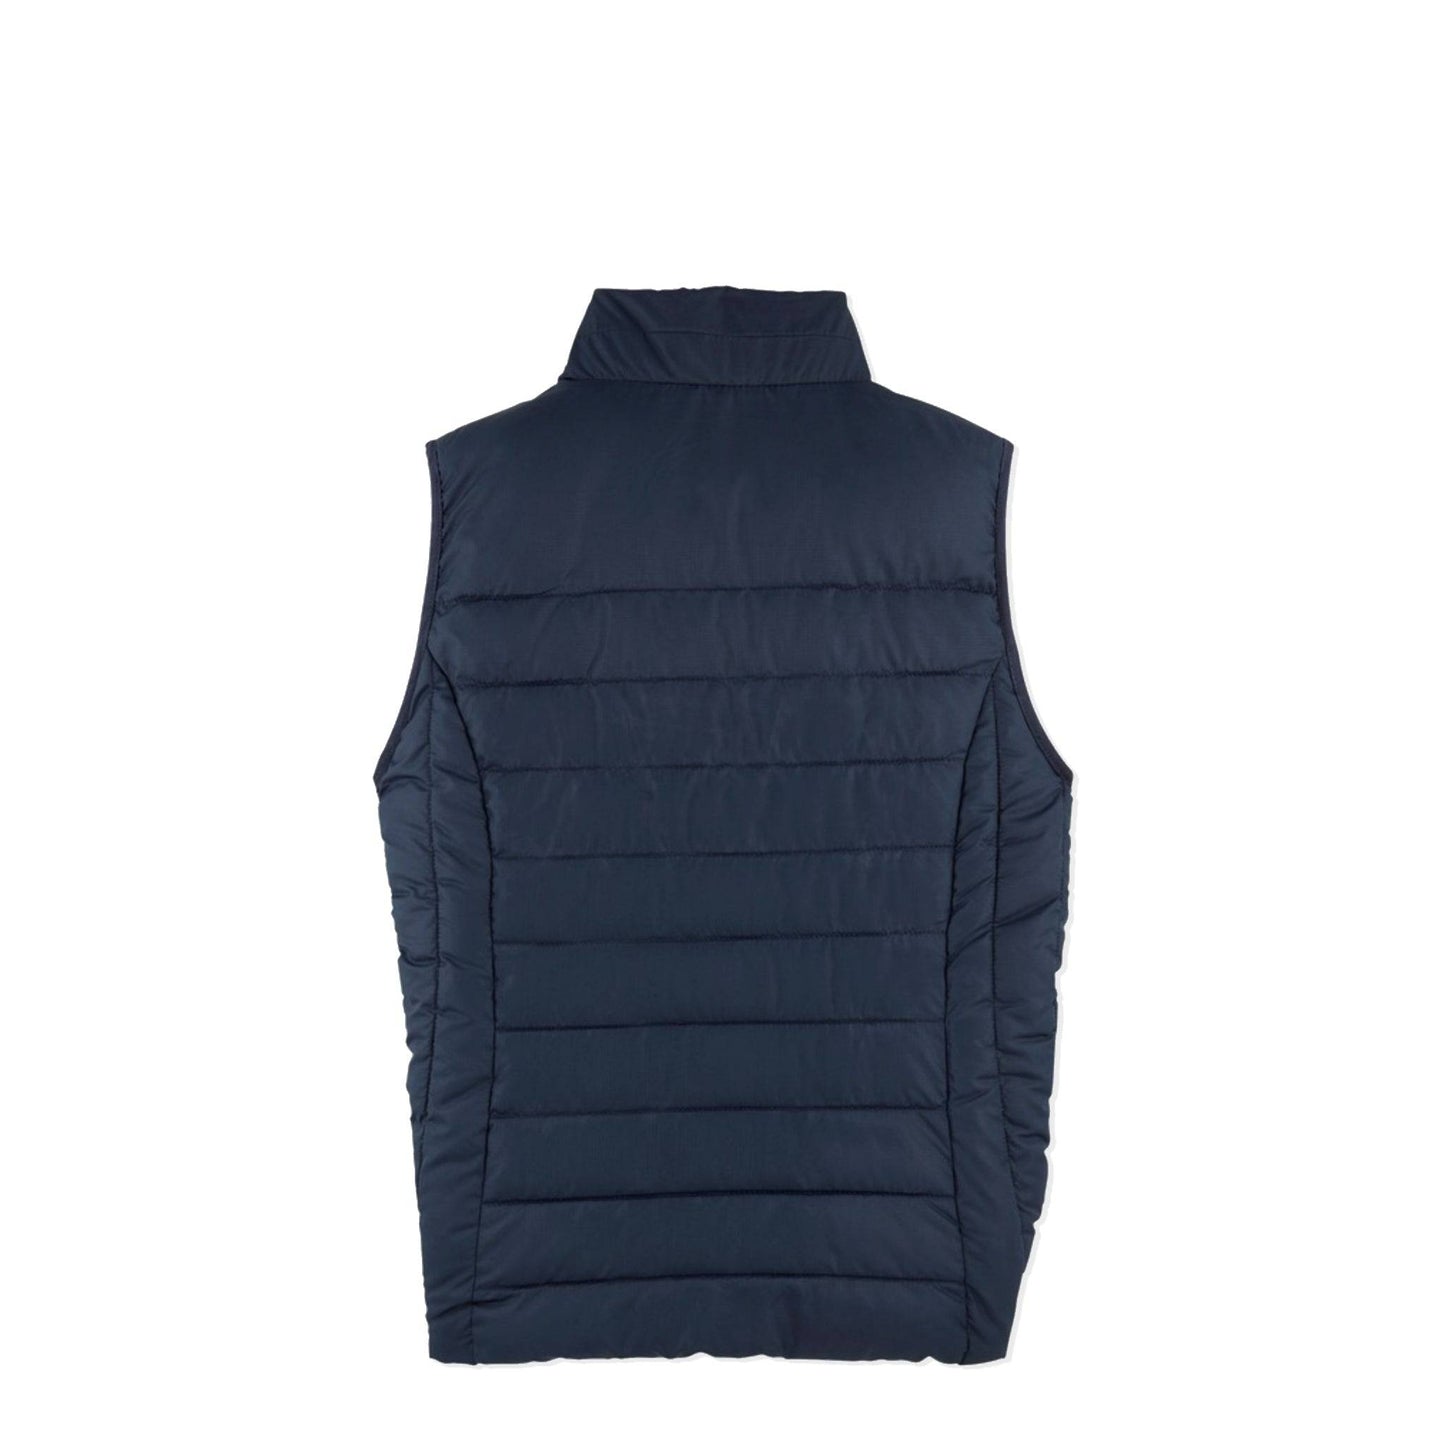 Tribe Core Navy Gilet - One Choice Apparel